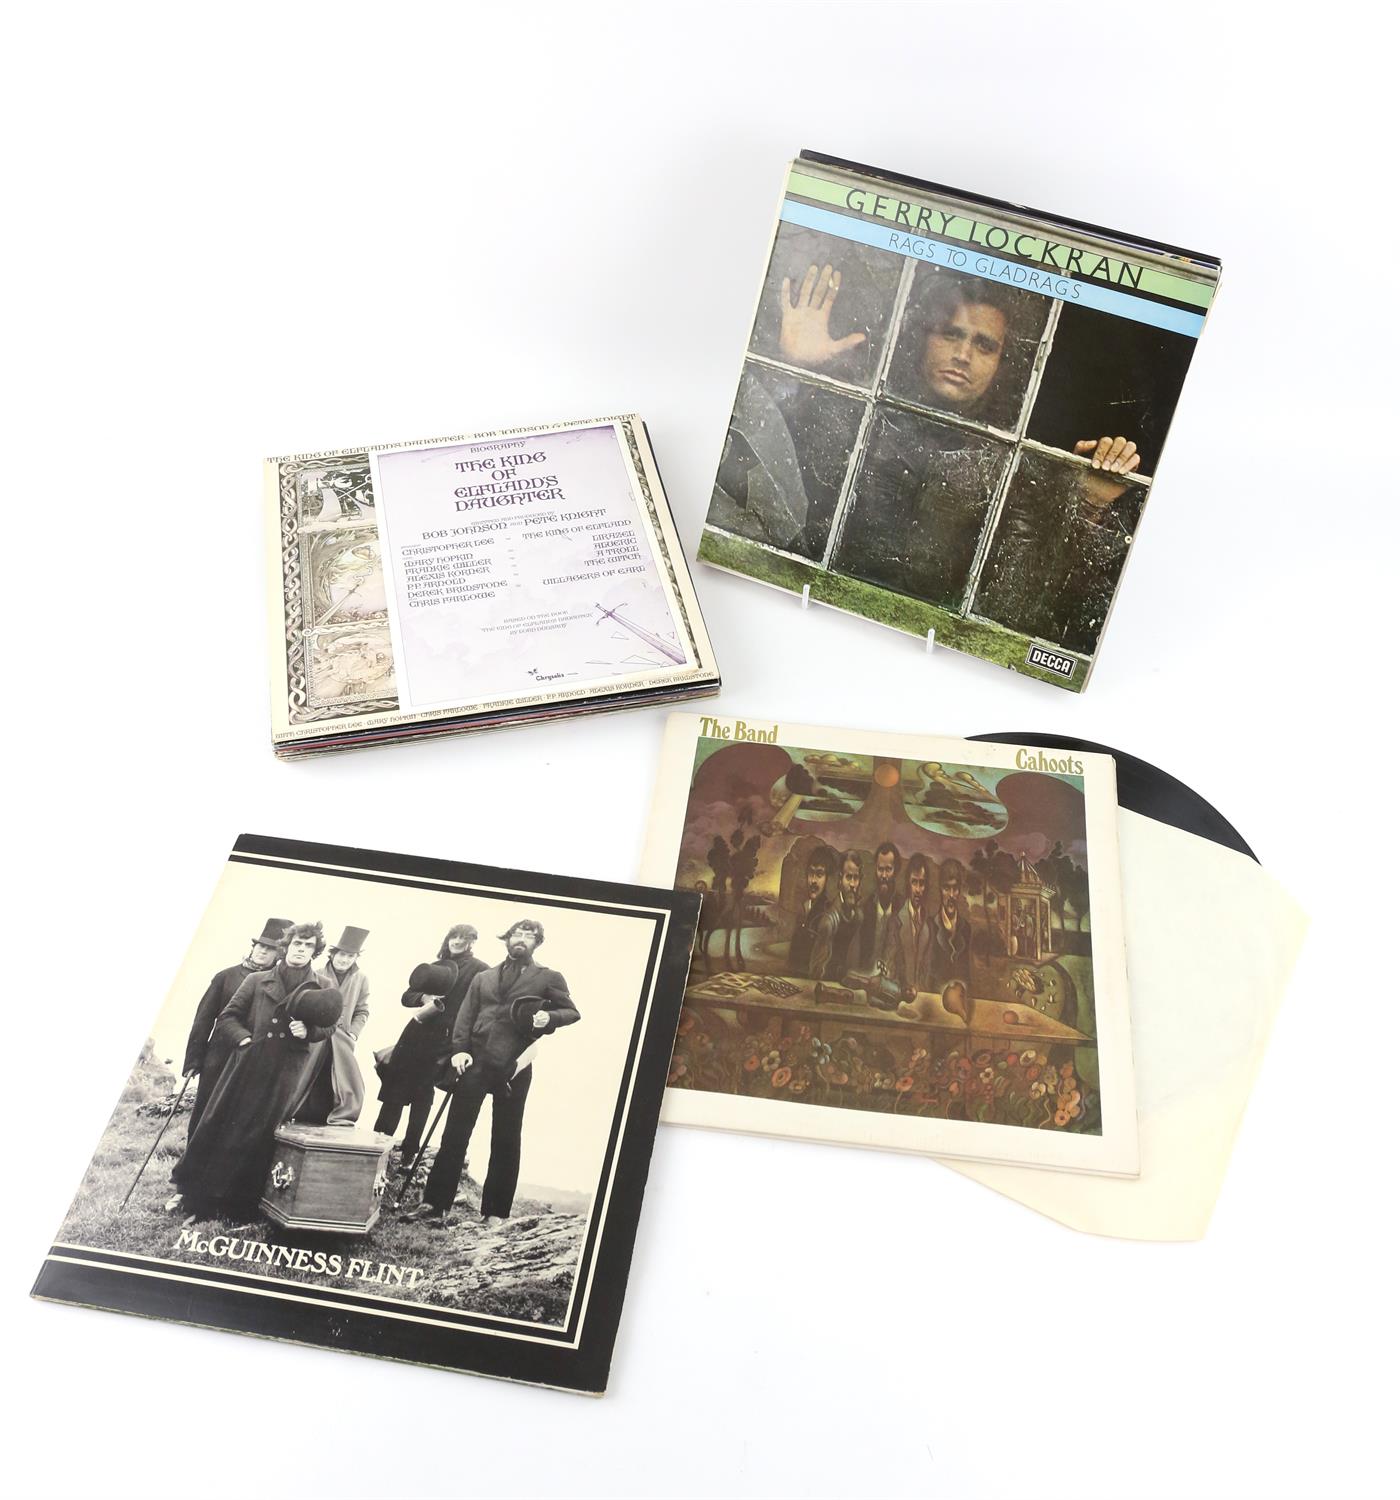 16 Mainly folk / acoustic rock LPs from the 1970s with early pressings of The Band’s “Cahoot” in